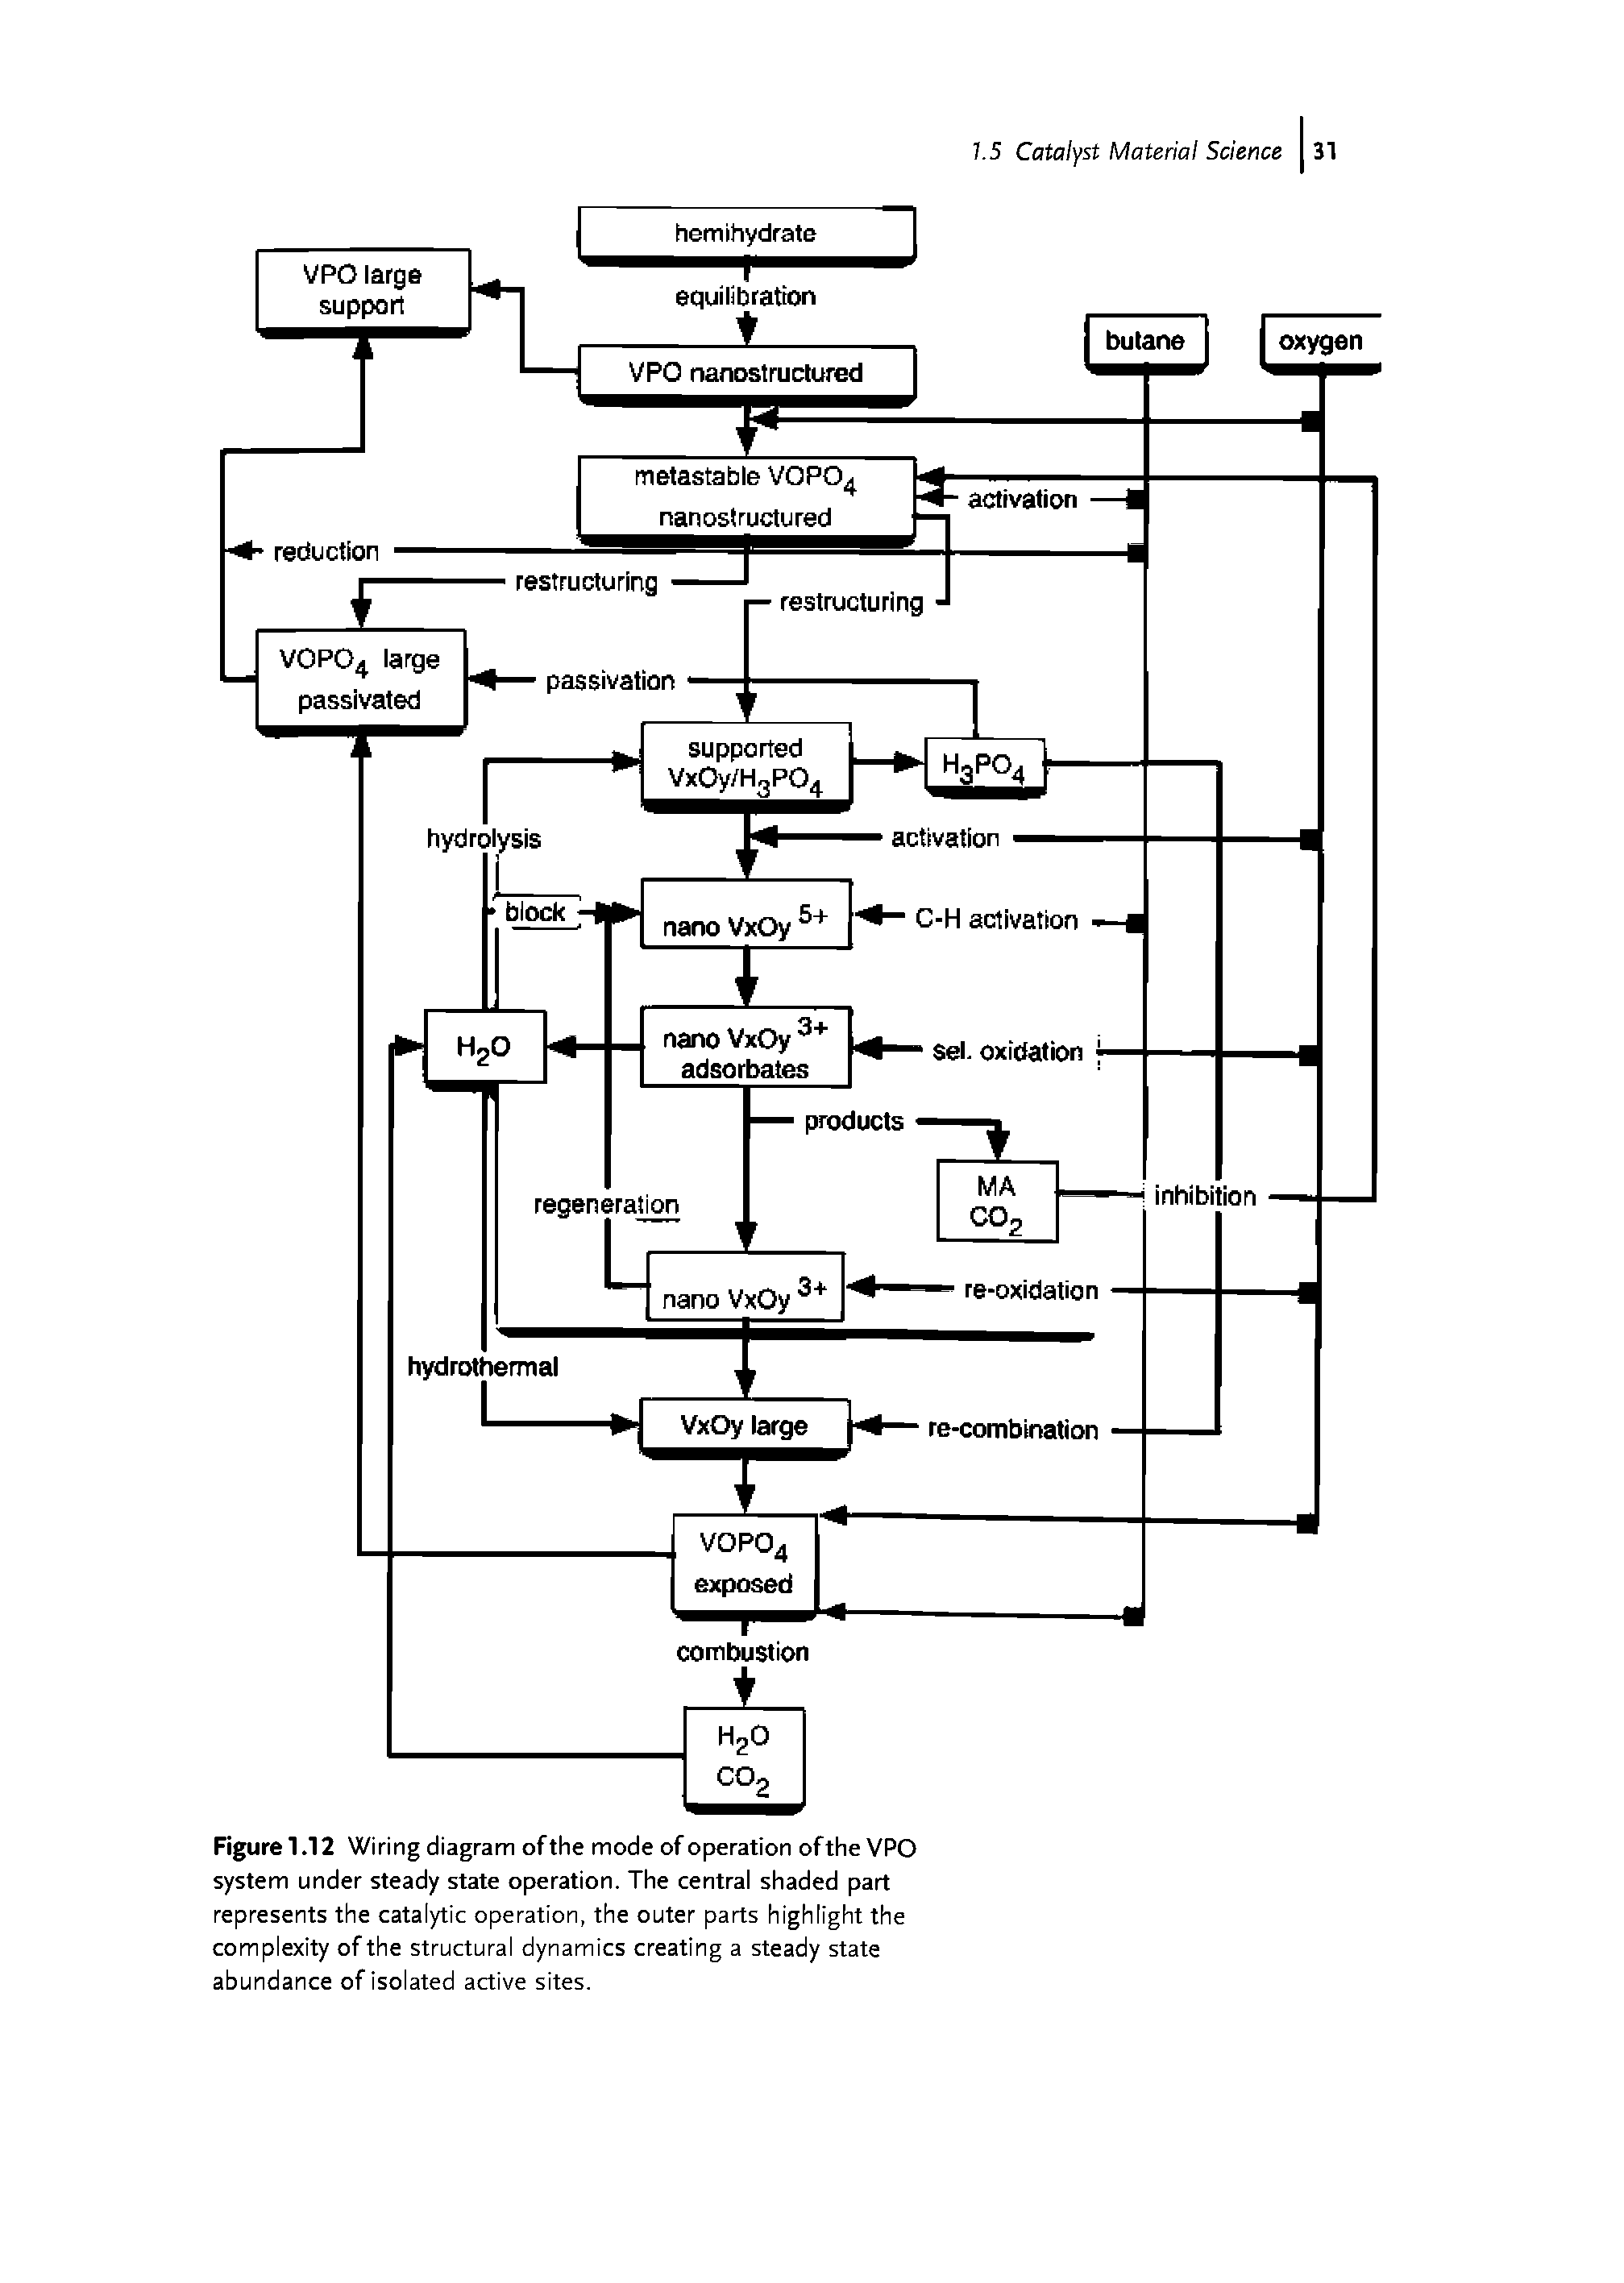 Figure 1.12 Wiring diagram of the mode of operation of the VPO system under steady state operation. The central shaded part represents the catalytic operation, the outer parts highlight the complexity of the structural dynamics creating a steady state abundance of isolated active sites.